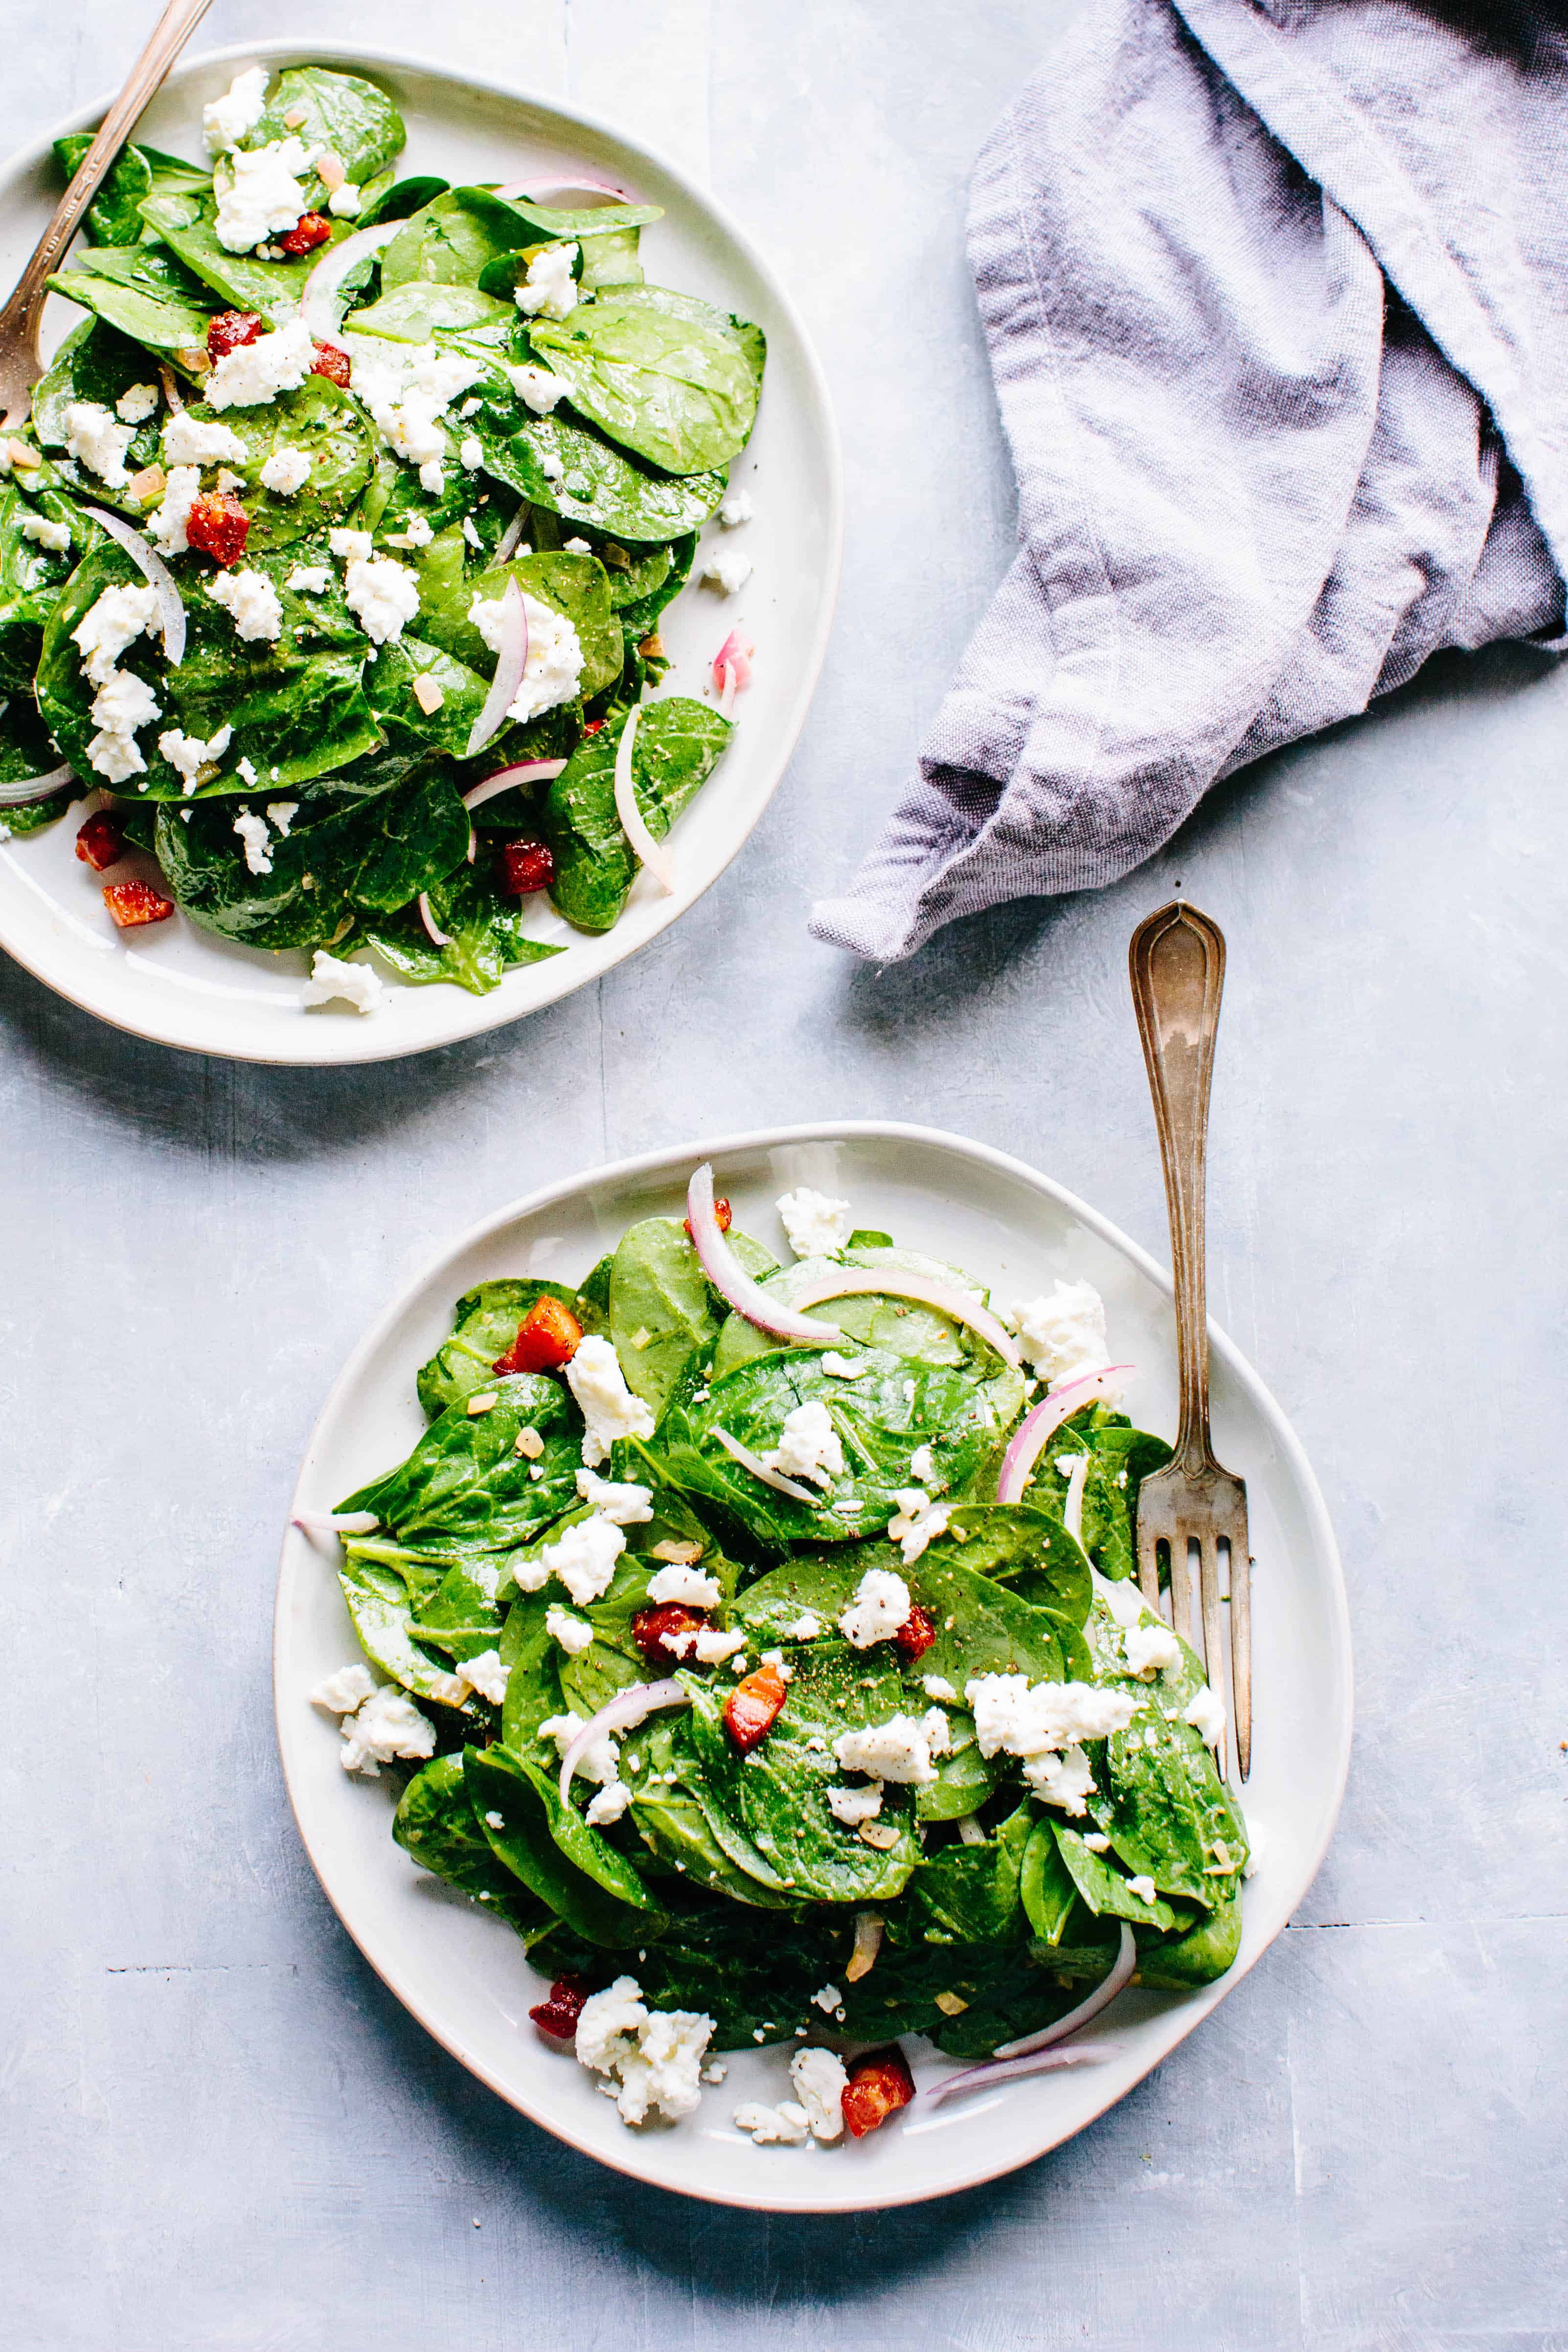 A table with 2 plates of spinach salad, one with a fork